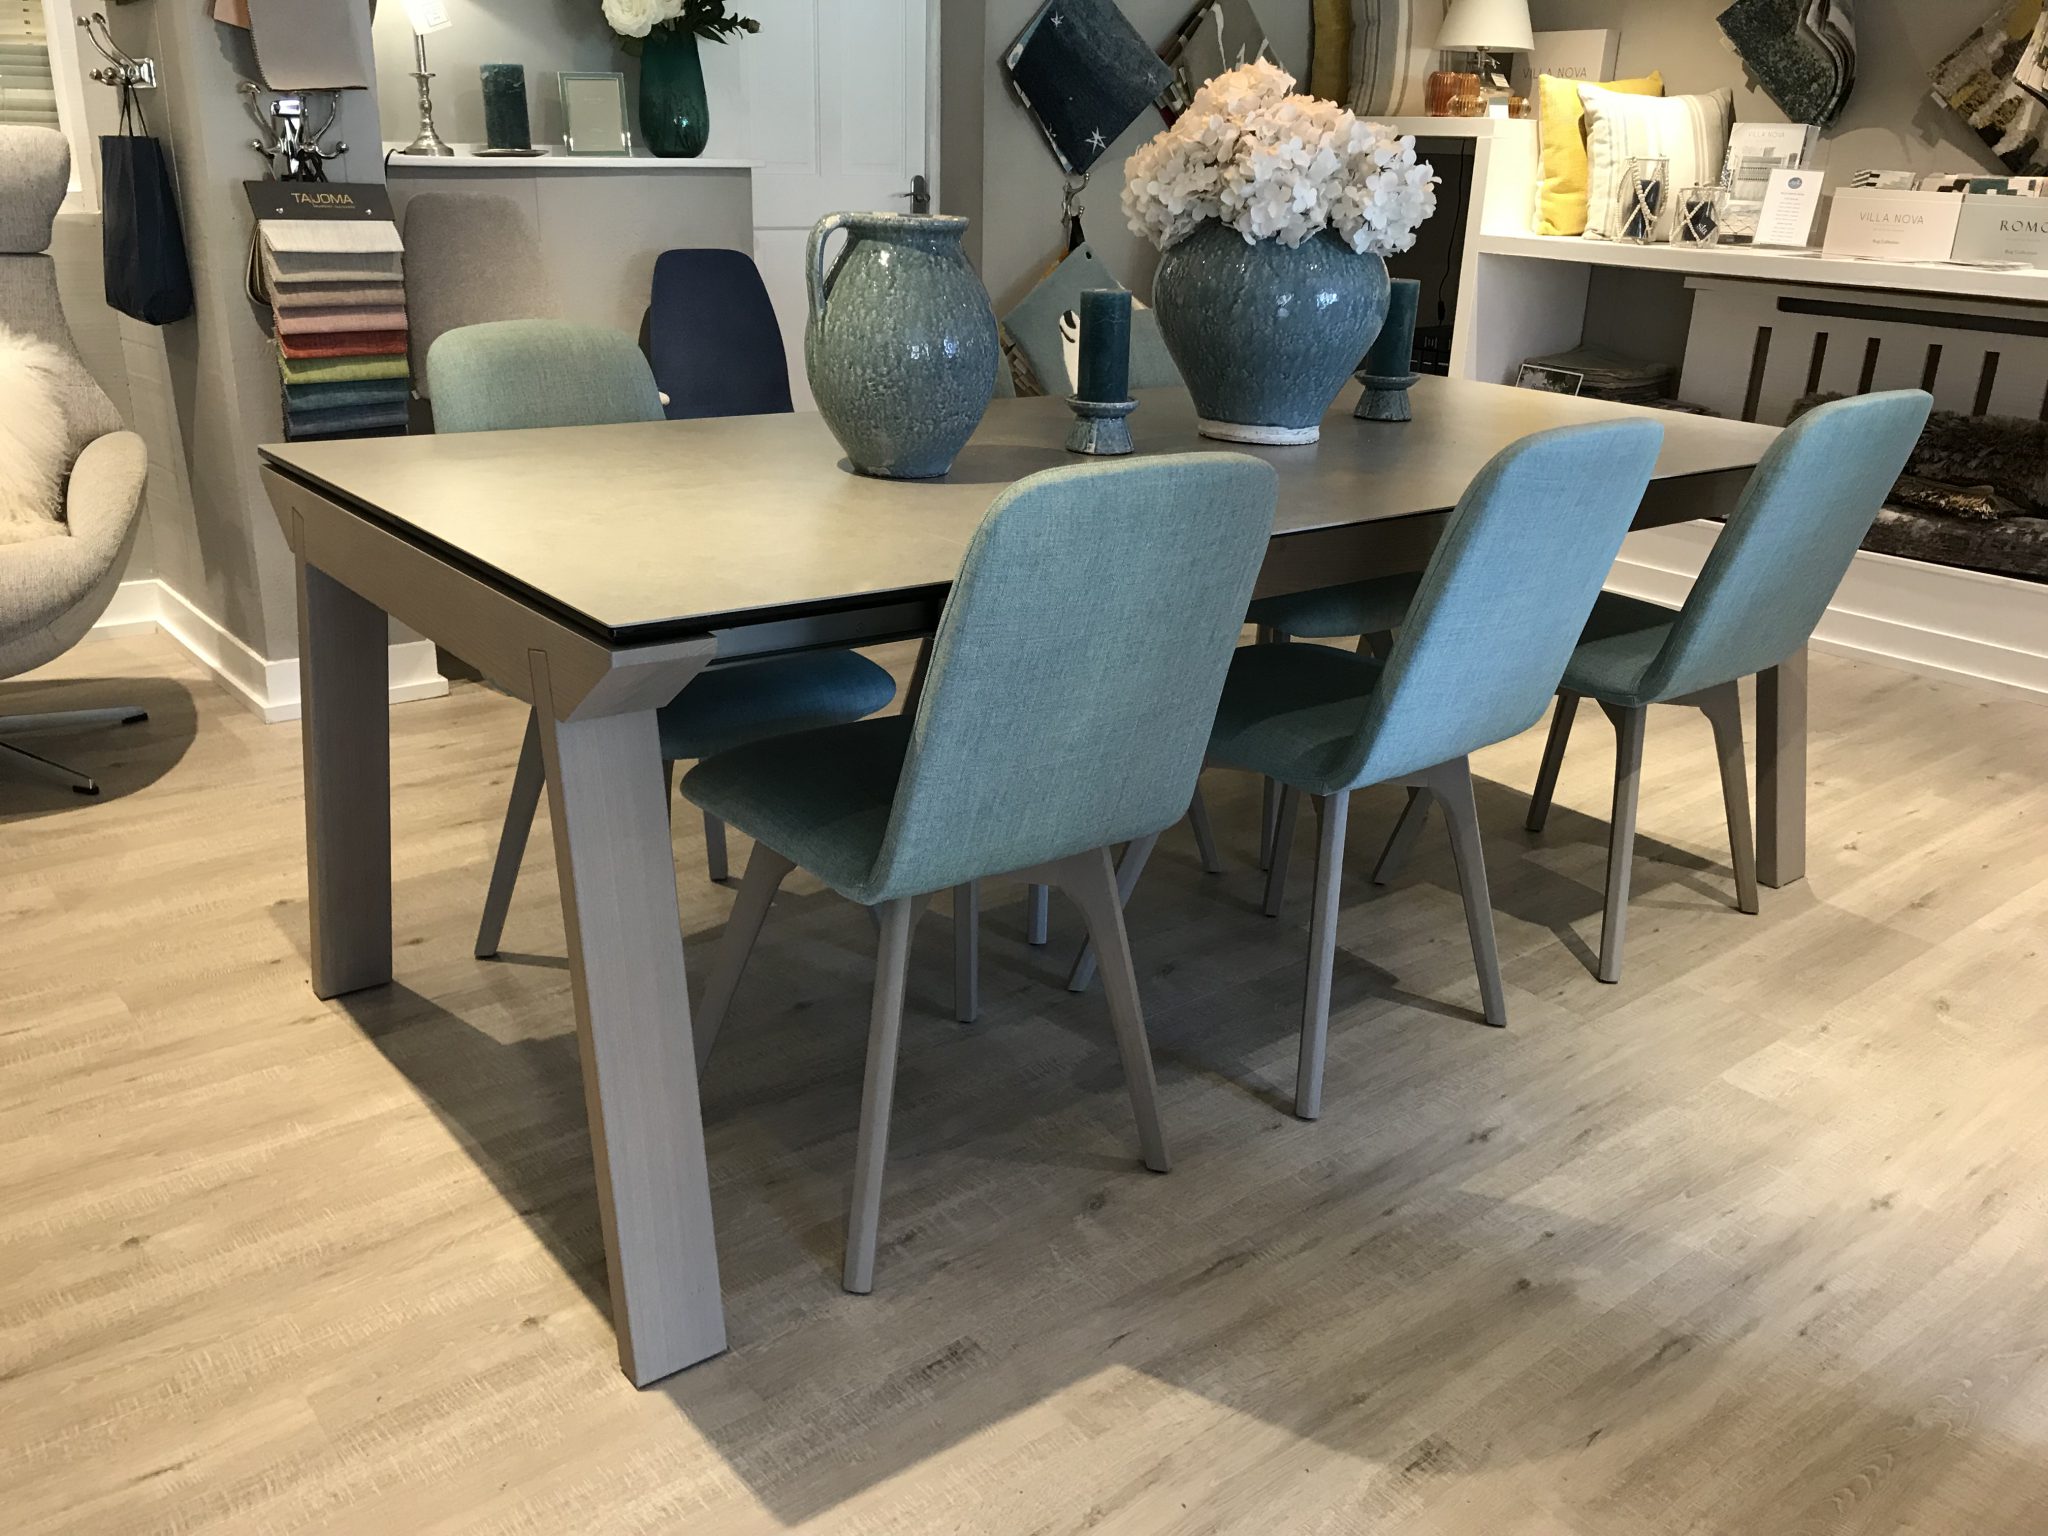 Ex-Display Copenhagen Dining Table & 6 Chairs - New England Home Interiors